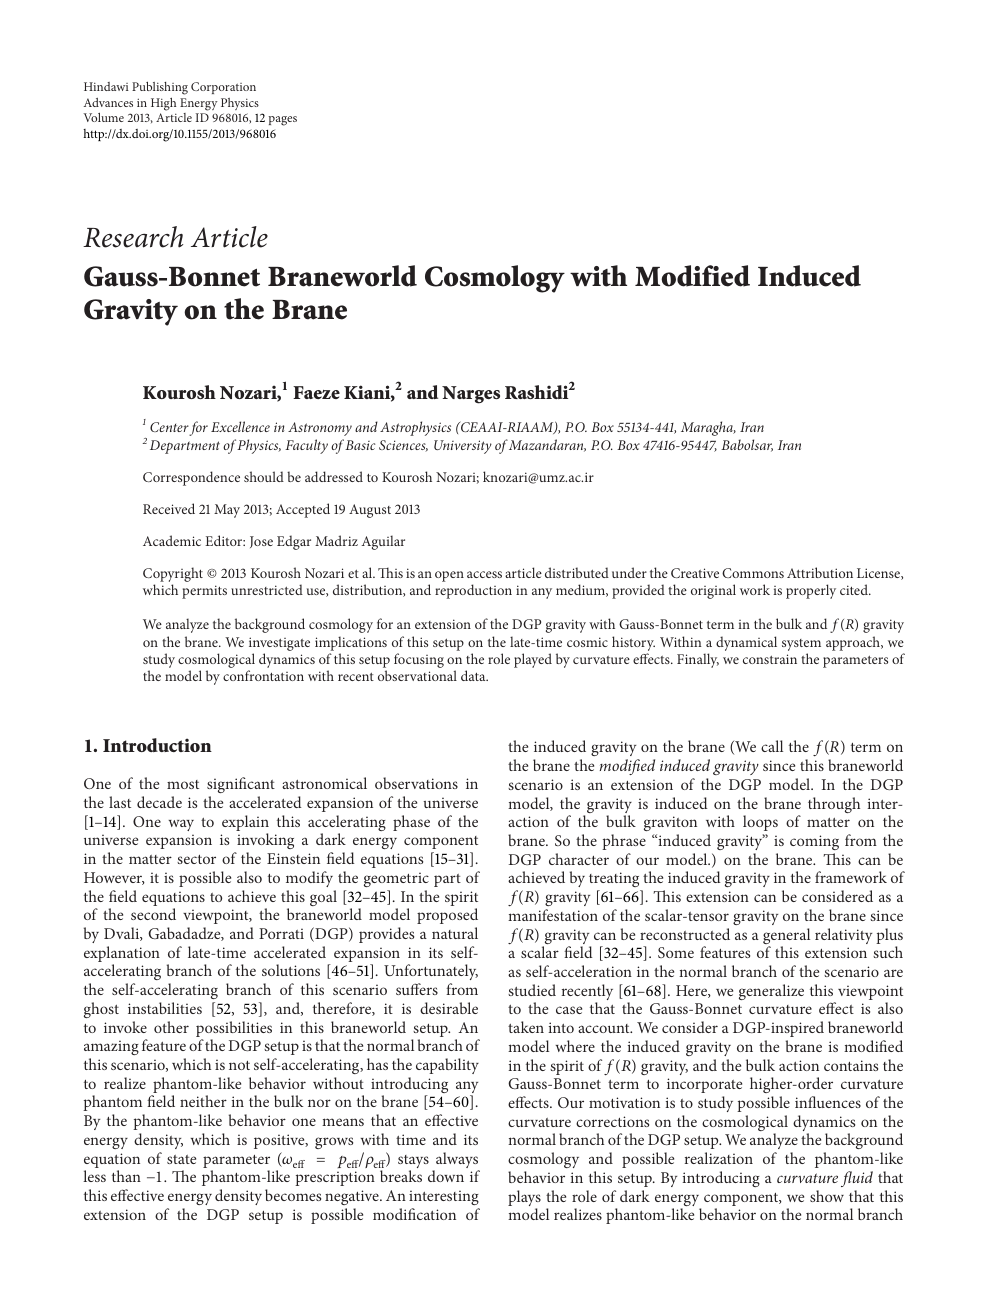 Gauss Bonnet Braneworld Cosmology With Modified Induced Gravity On The Brane Topic Of Research Paper In Physical Sciences Download Scholarly Article Pdf And Read For Free On Cyberleninka Open Science Hub